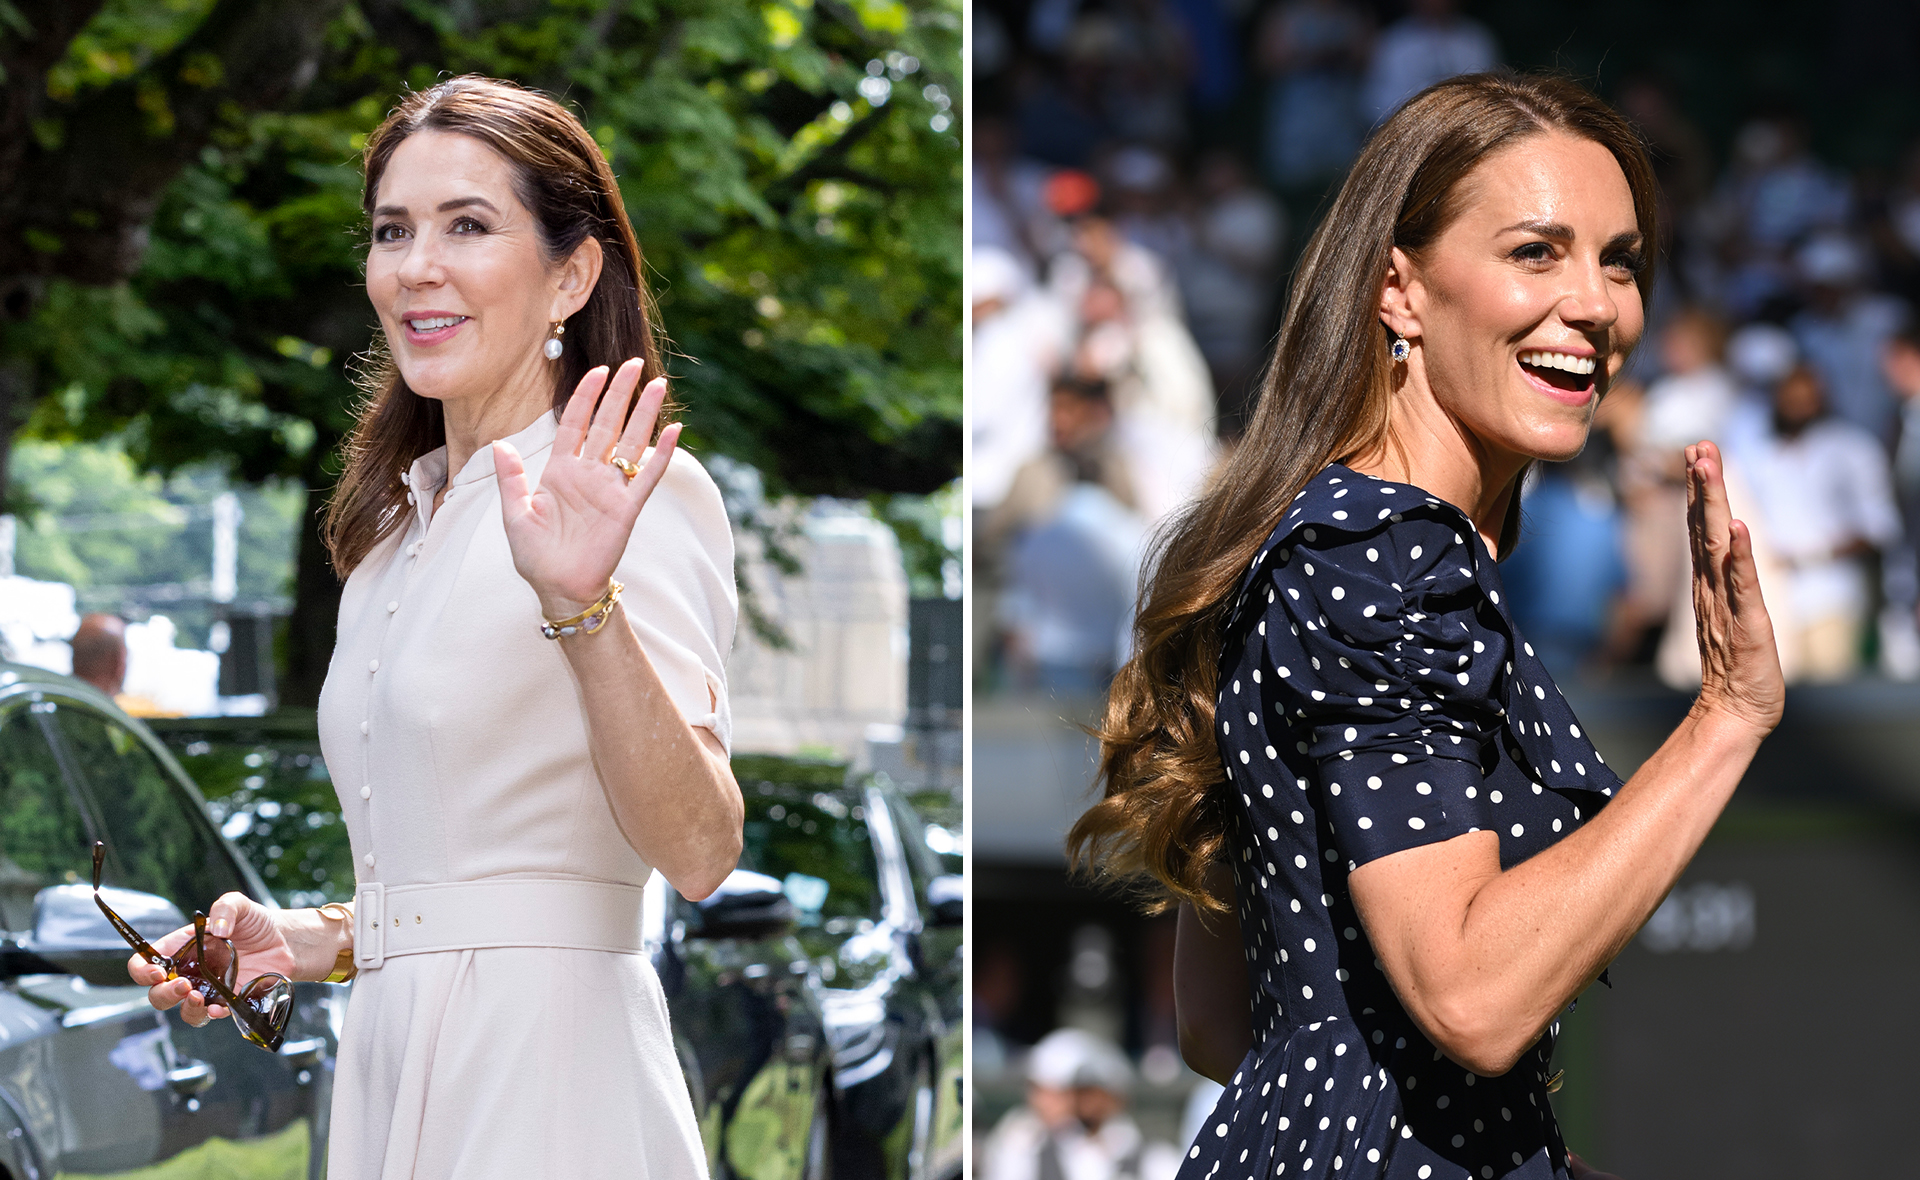 The “outdated” style statement royals like Kate Middleton and Princess Mary are bringing back into fashion